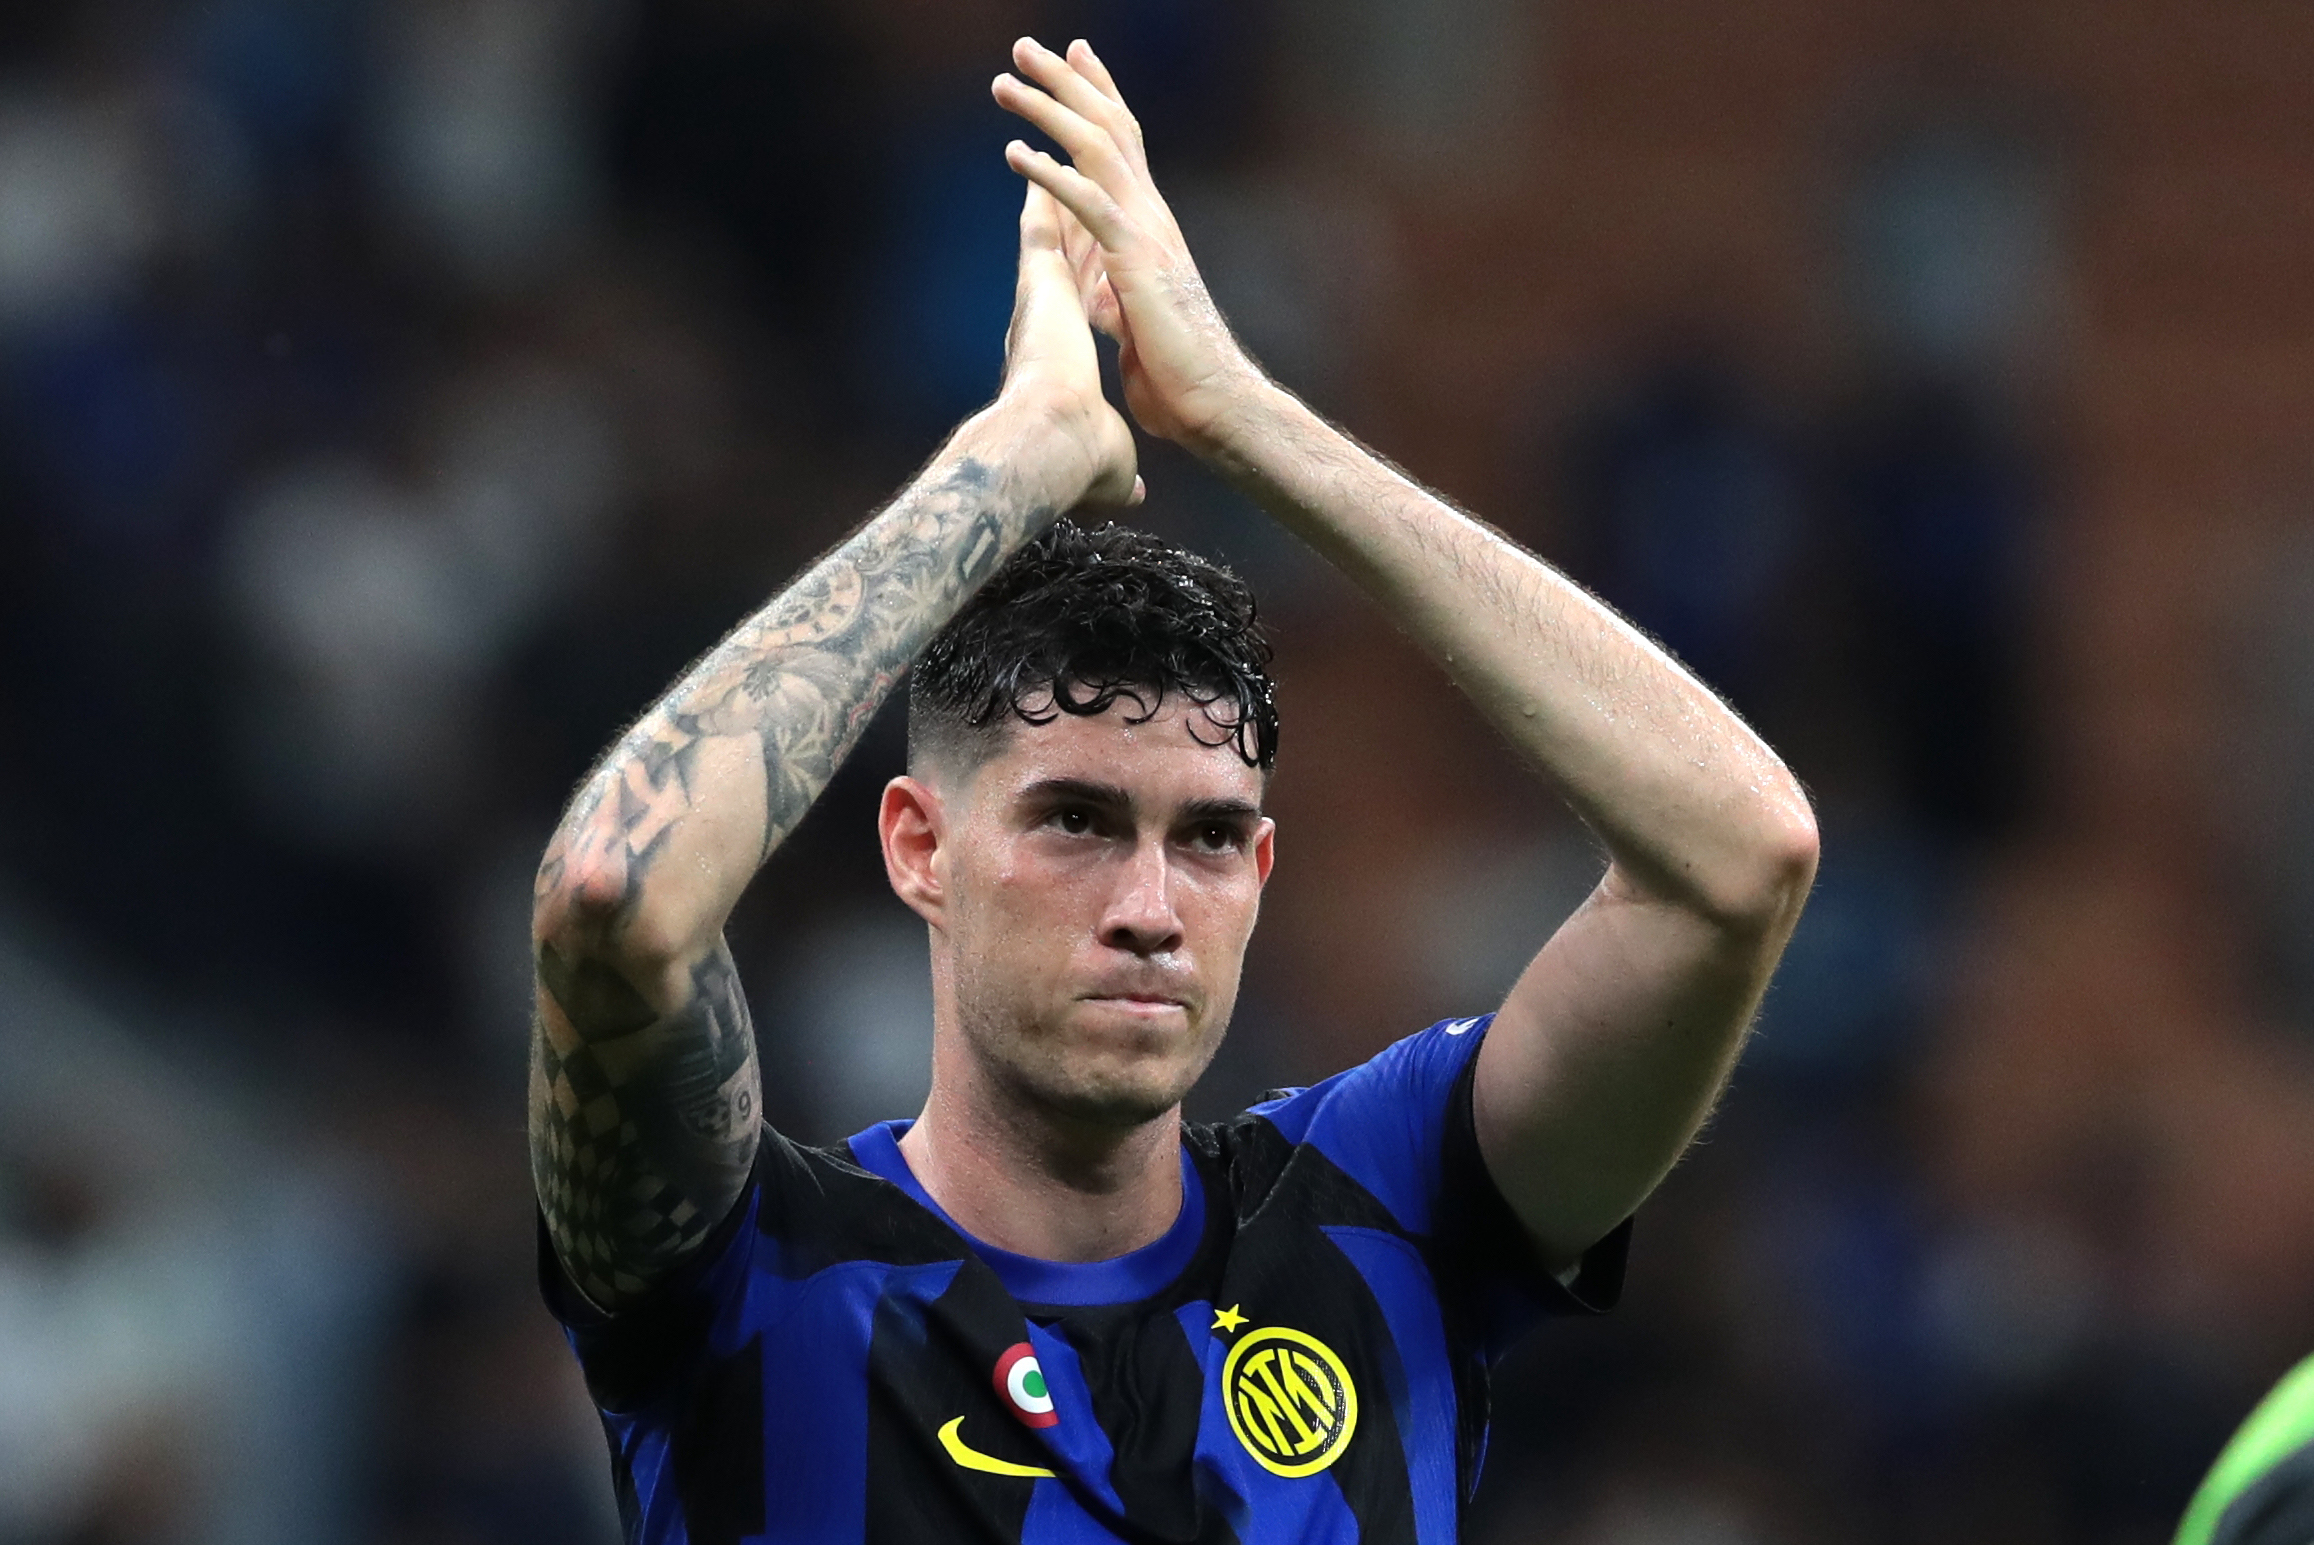 Alessandro Bastoni and Timothy Weah won’t be present in the upcoming clash between Inter and Juventus due to their pre-existing injuries.